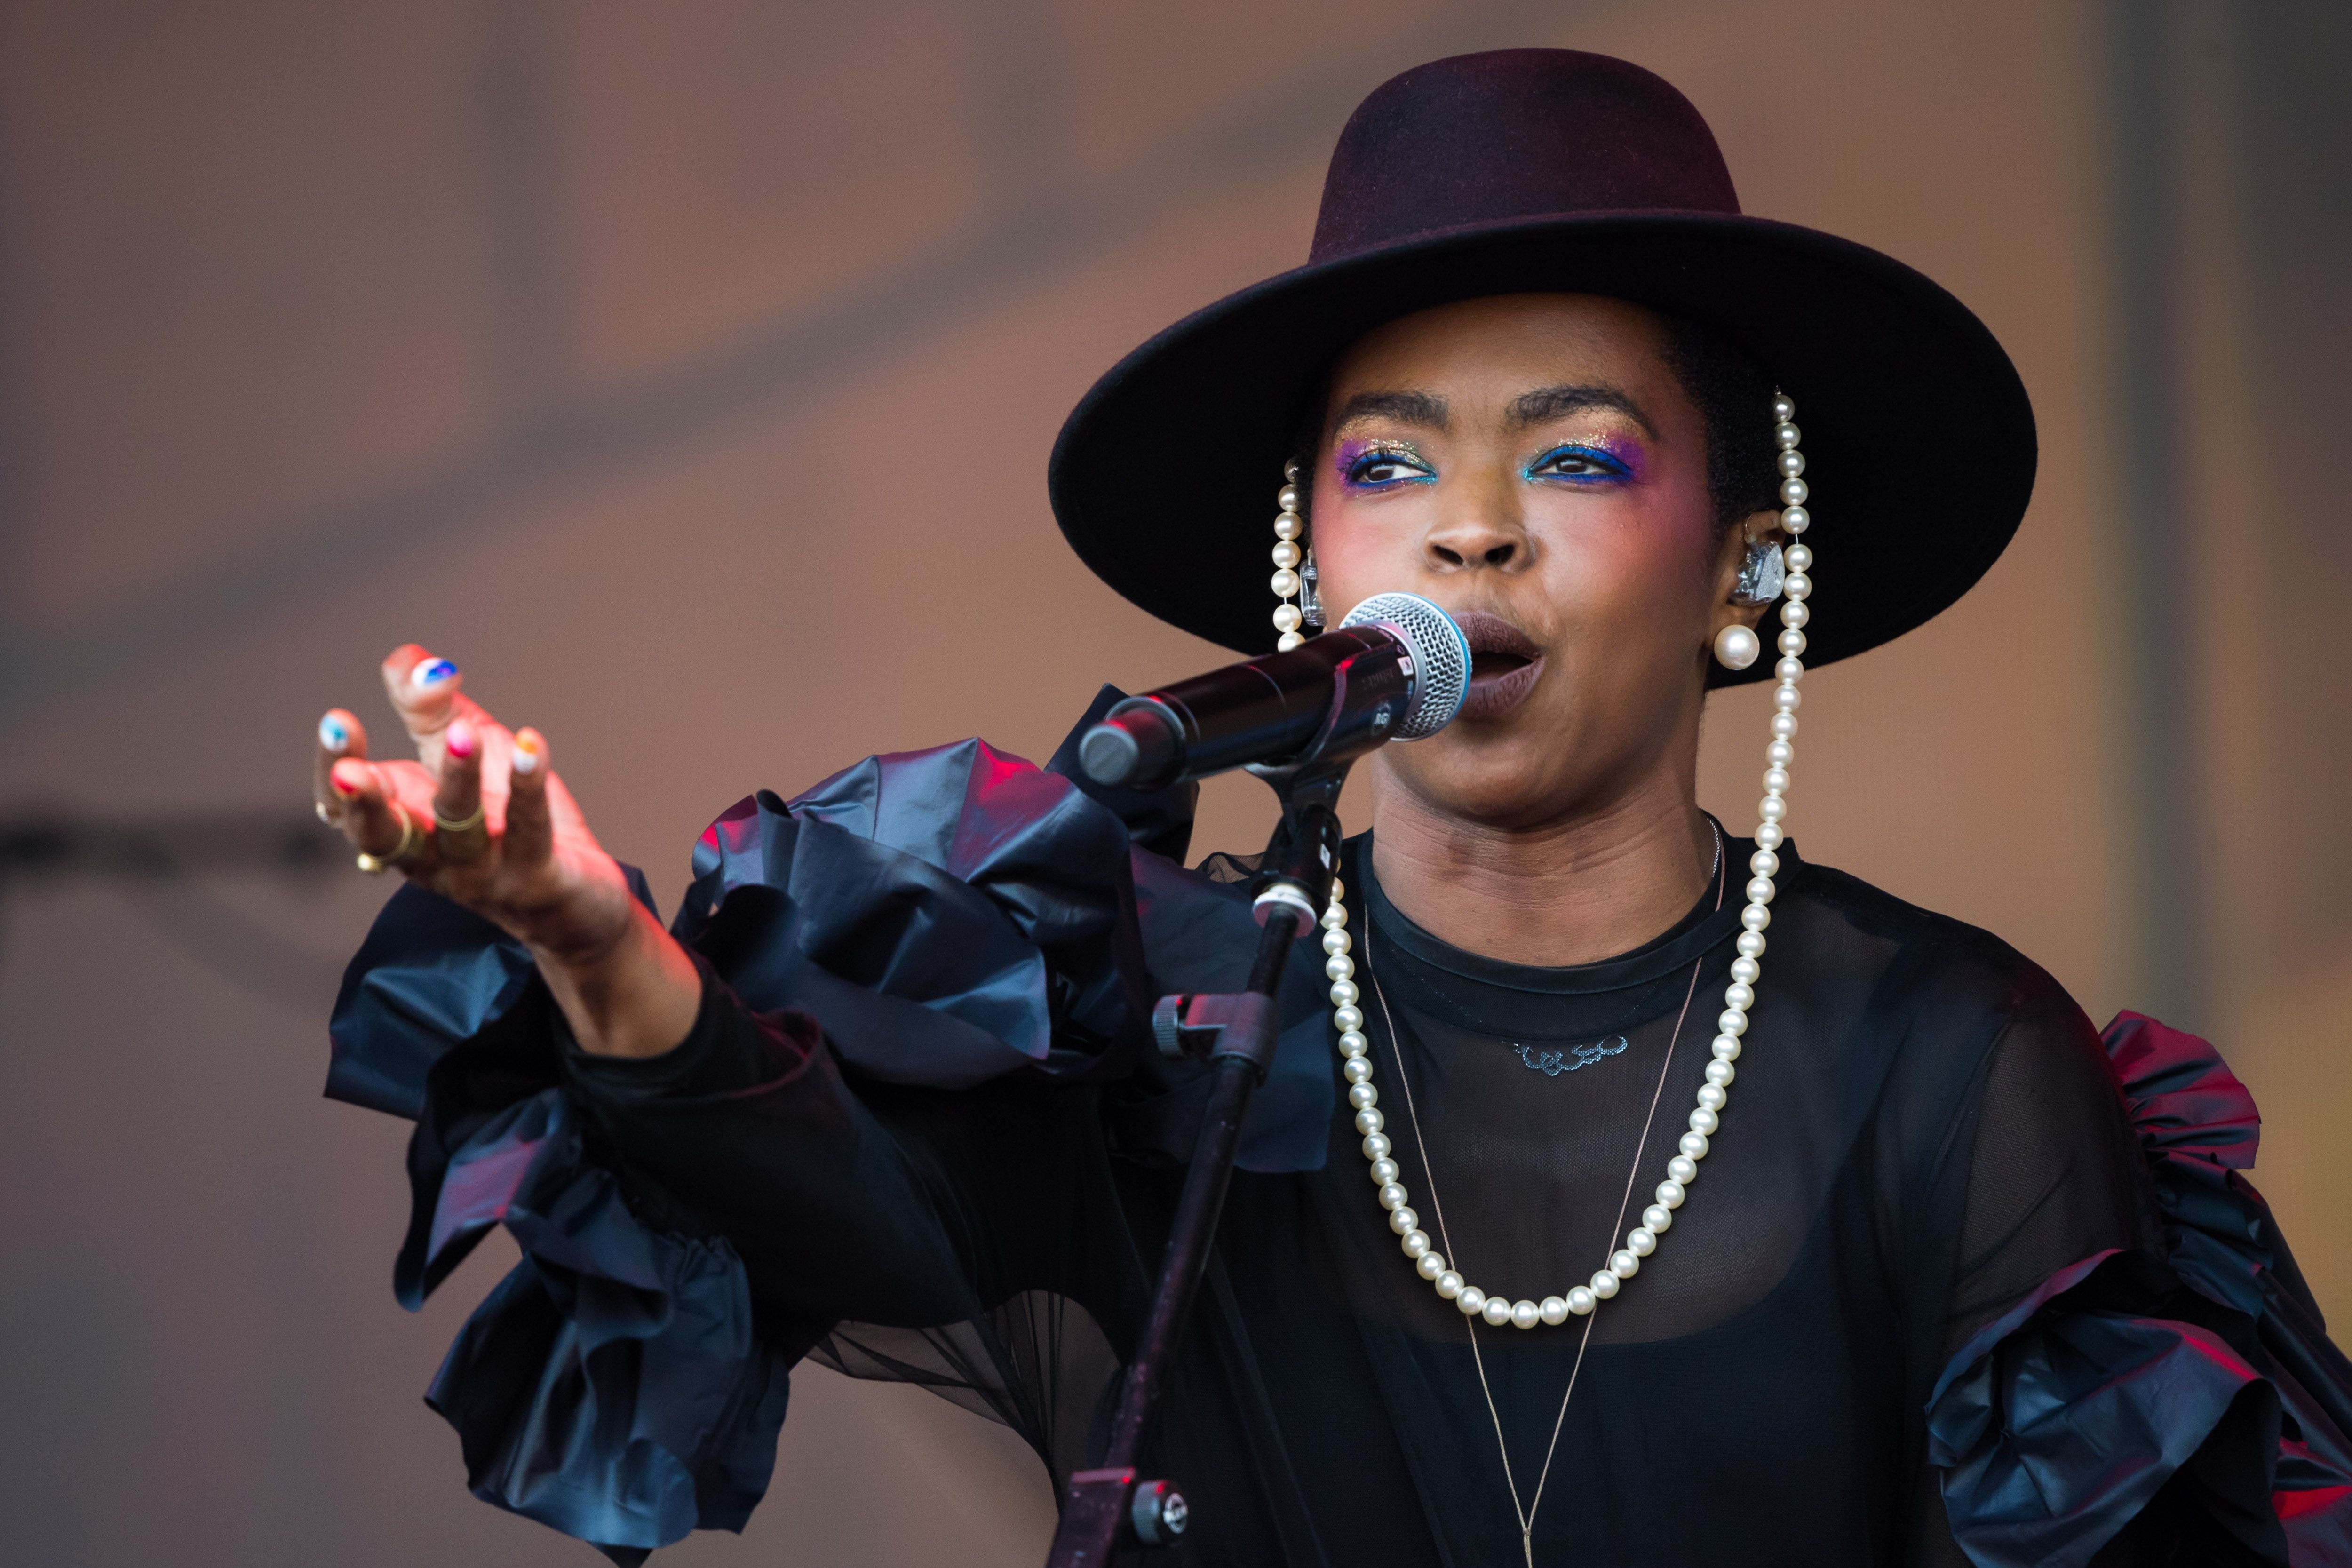 Lauryn Hill performing at the Glastonbury Festival in England in June 2019. | Photo: Getty Images